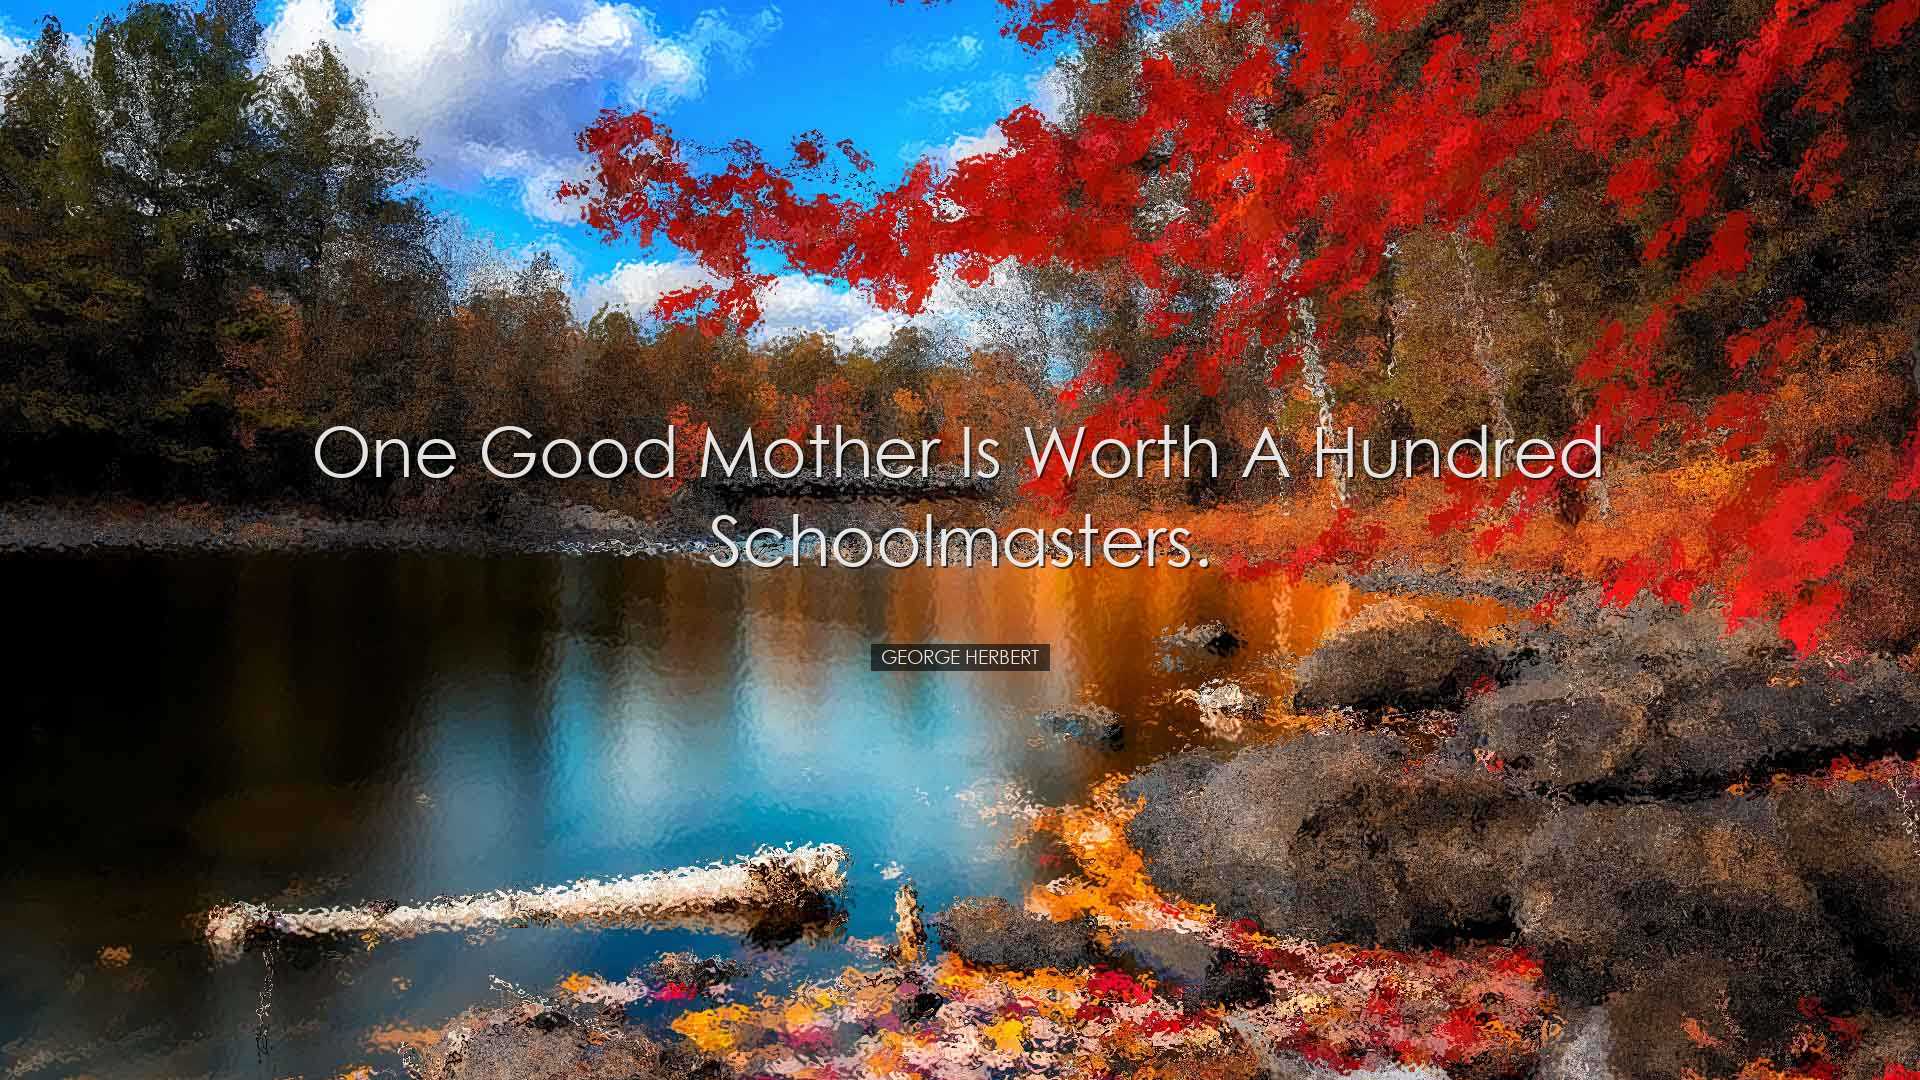 One good mother is worth a hundred schoolmasters. - George Herbert